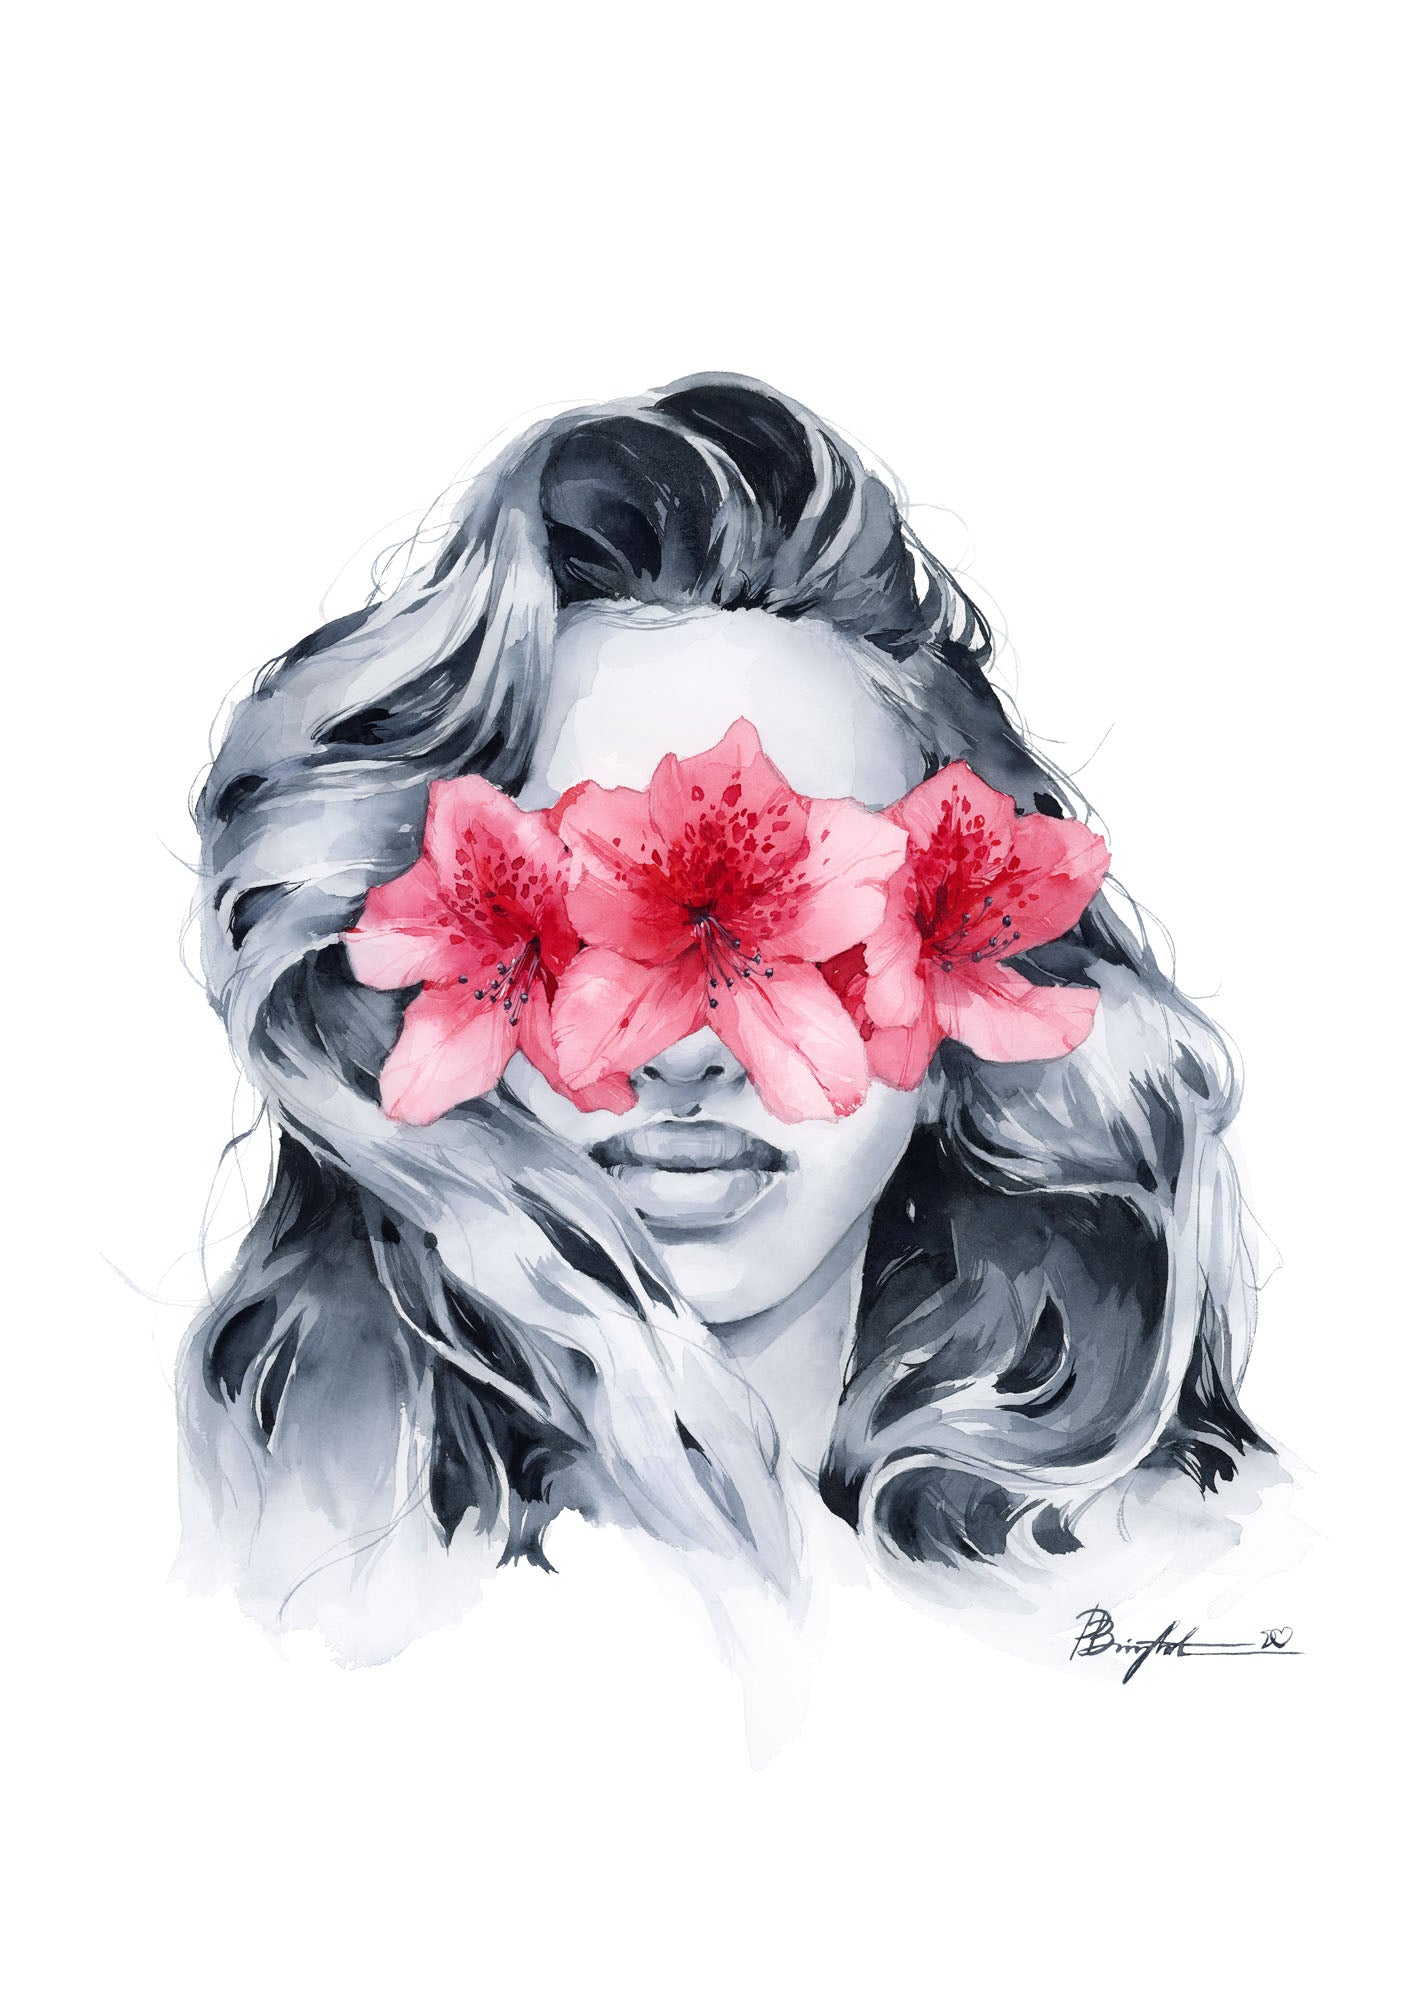 Rhododendron blindfolded by Polina Bright